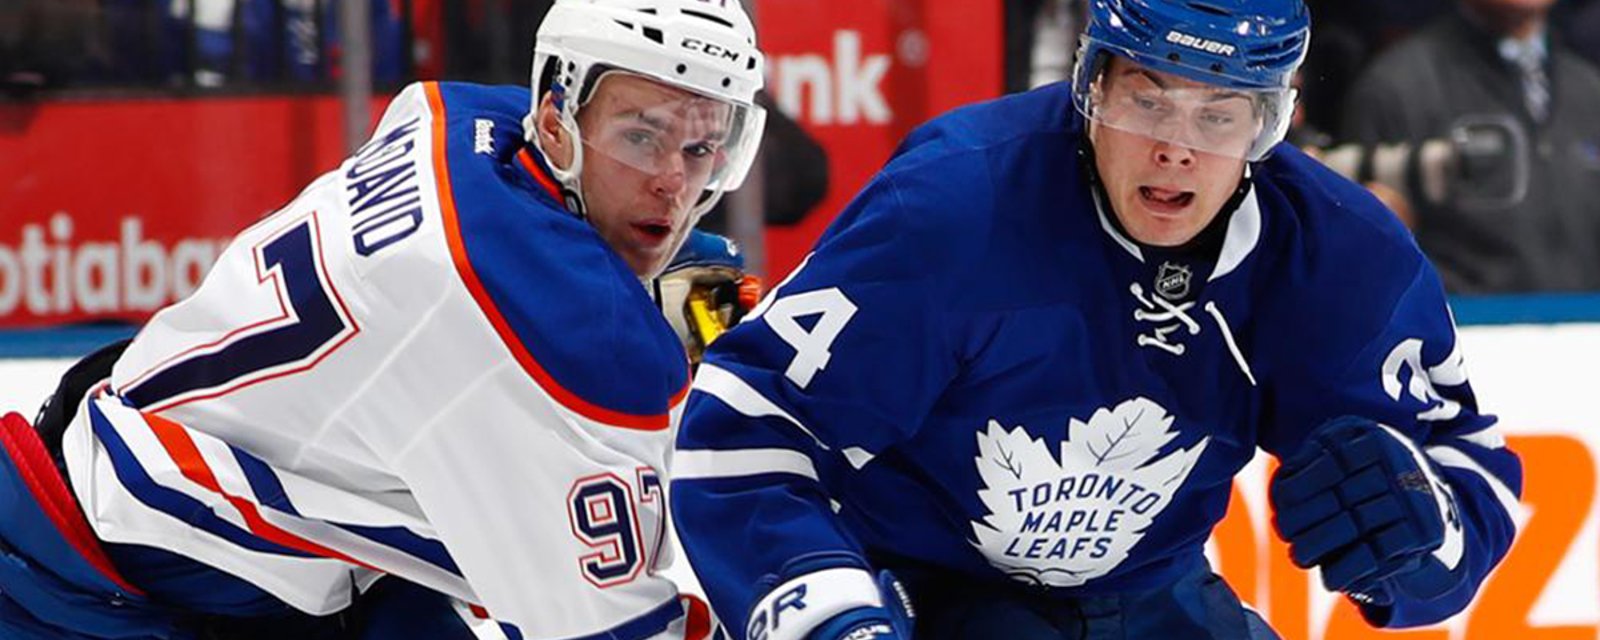 Your Call: Who will deliver more Cups? Matthews or McDavid?